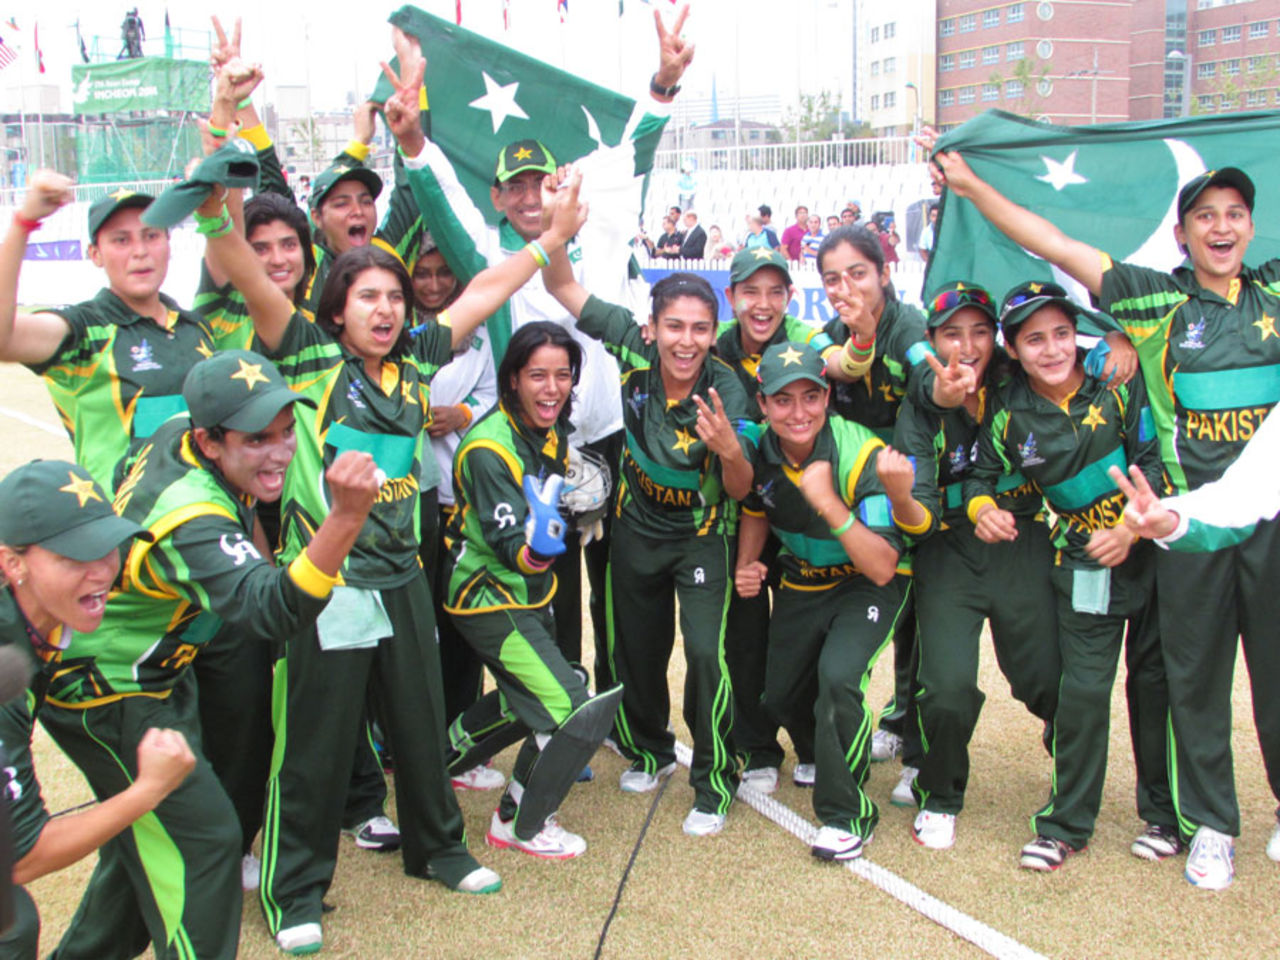 The victorious Pakistan Women's team celebrate after securing the gold medal, Incheon, September 30, 2014